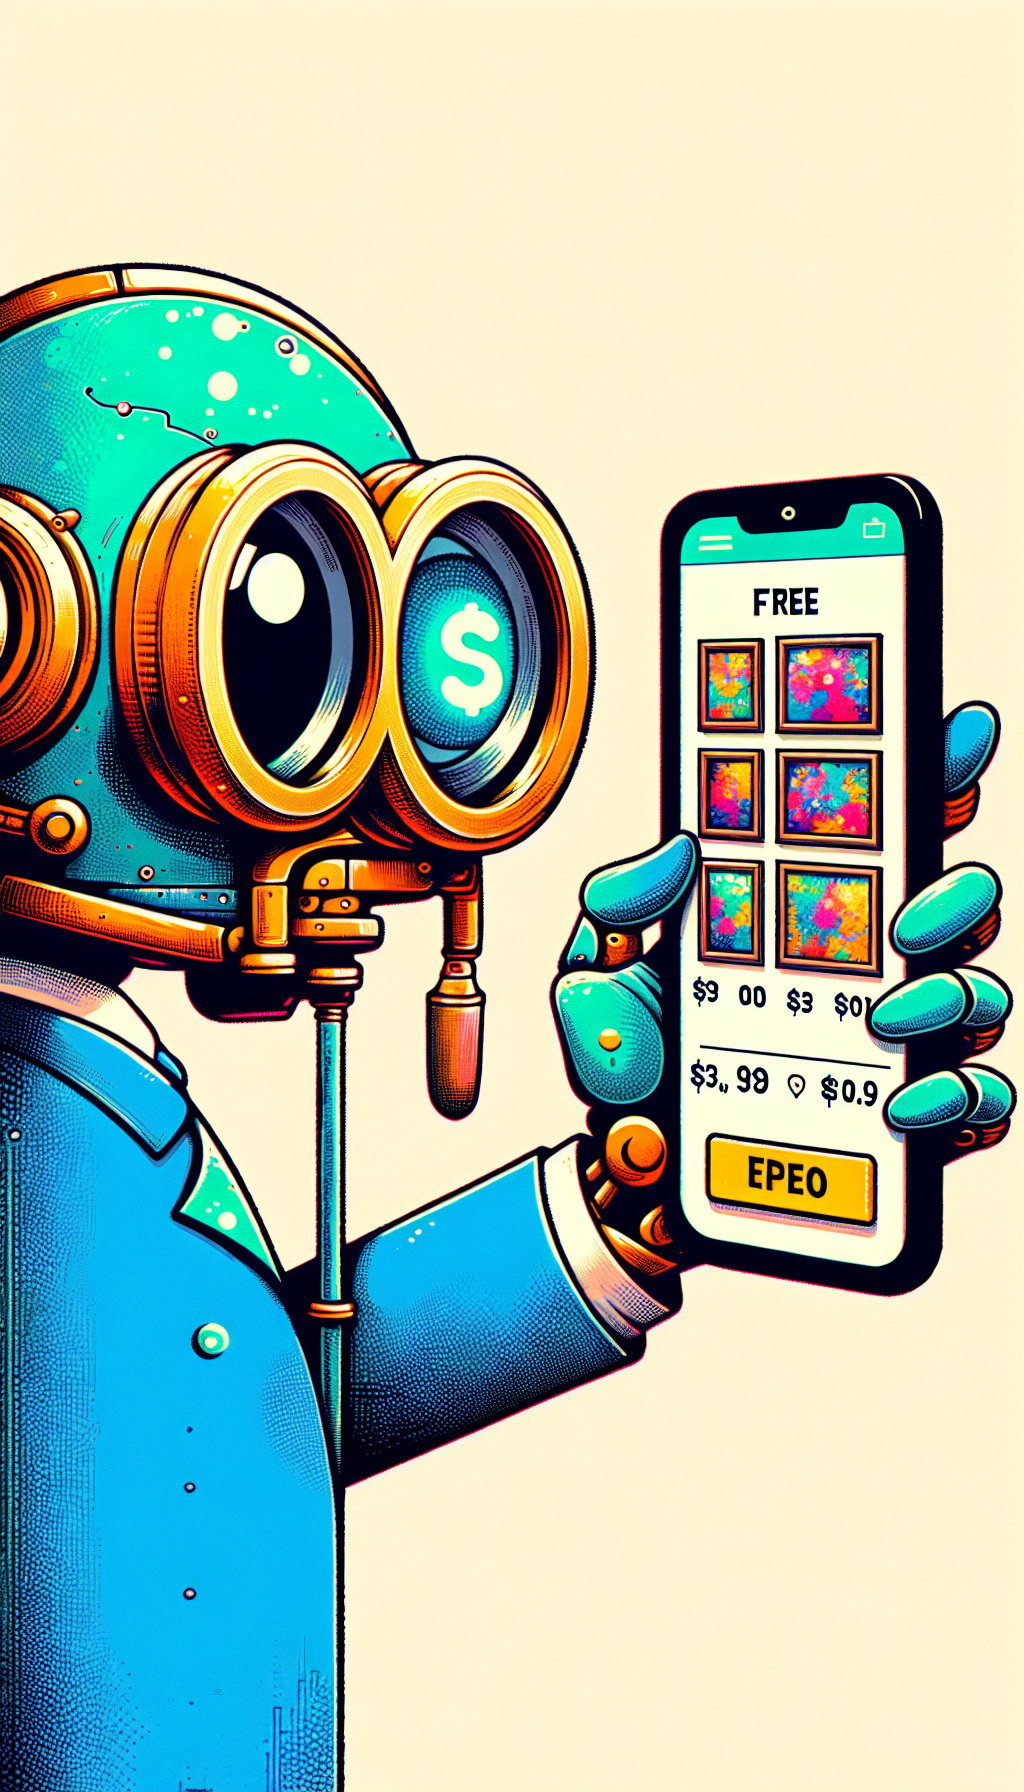 A whimsical caricature of a quirky robot art critic, equipped with oversized, magnifying monocle eyes, assesses a colorful gallery of digital art frames on a smartphone screen, with price tags reading $0. The fusion of classic critique with contemporary technology is rendered in a playful, mix-matched art style, juxtaposing pixel art with watercolor and line art elements.